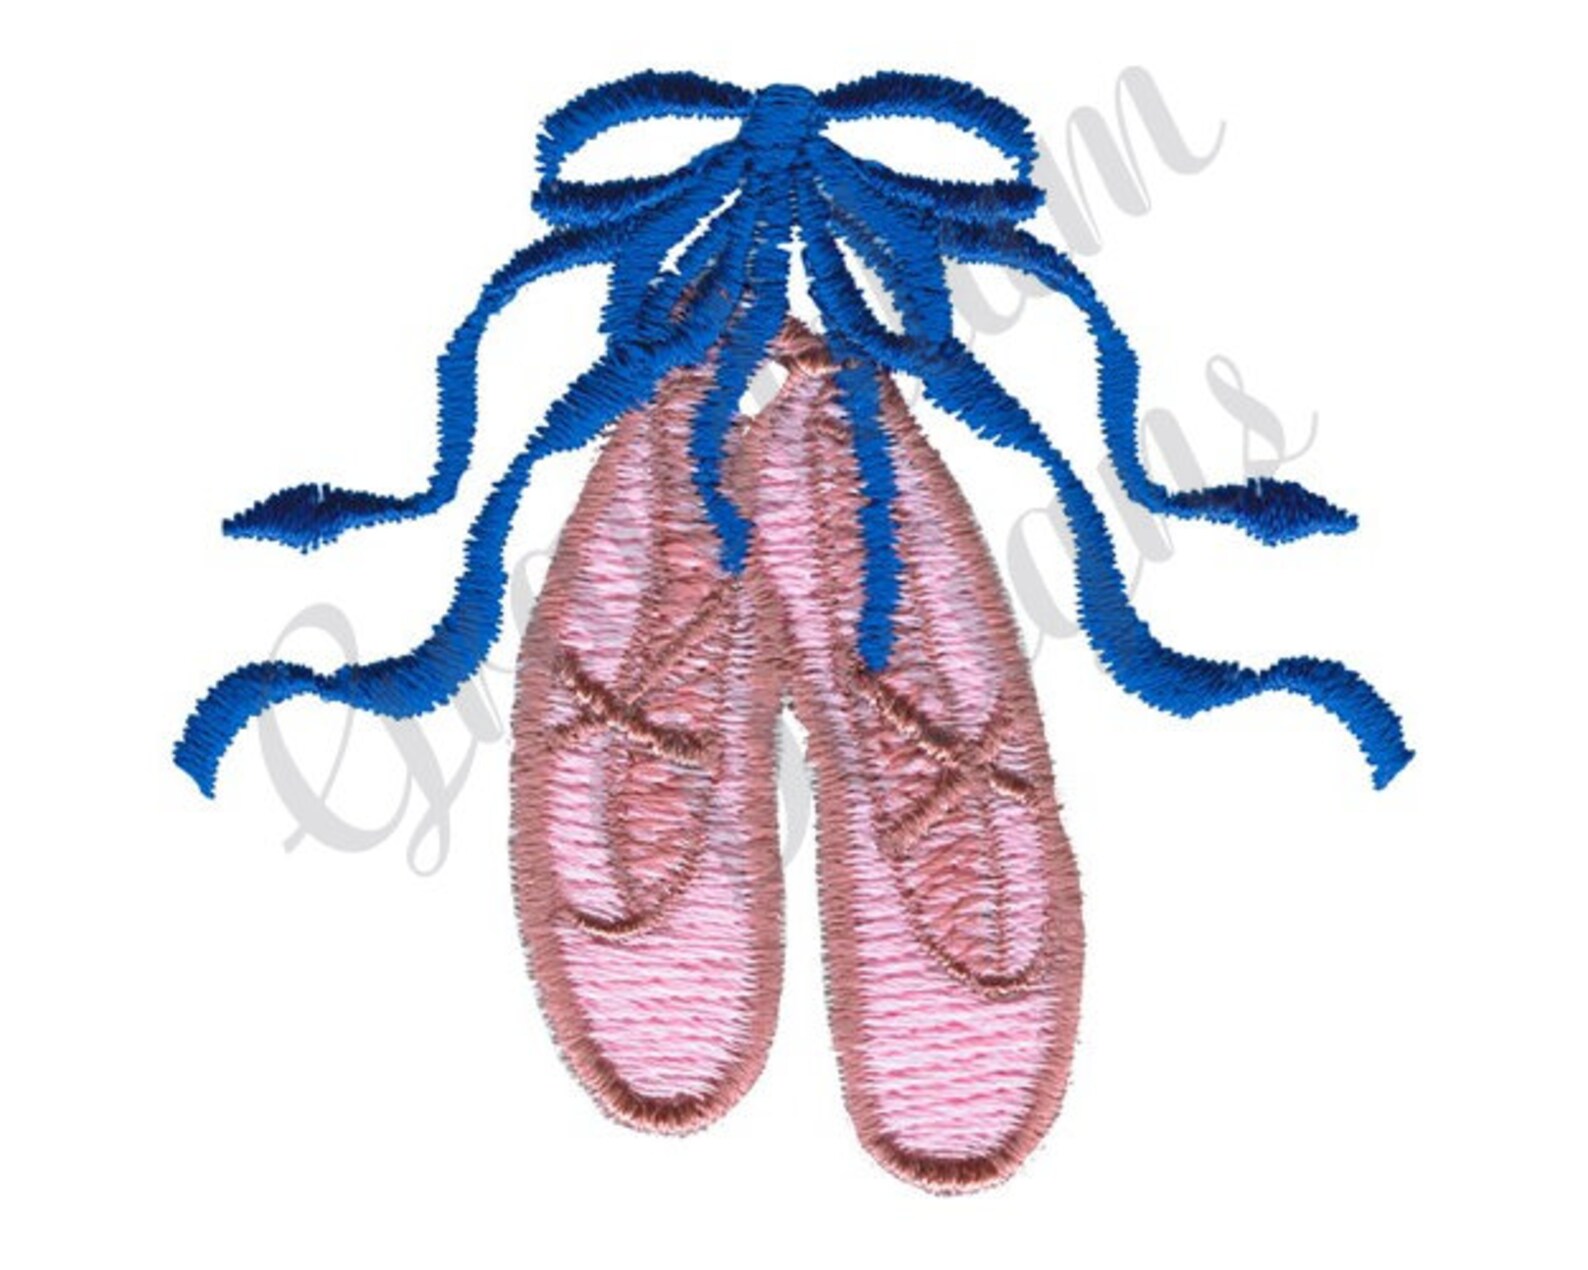 ballet slippers - machine embroidery design